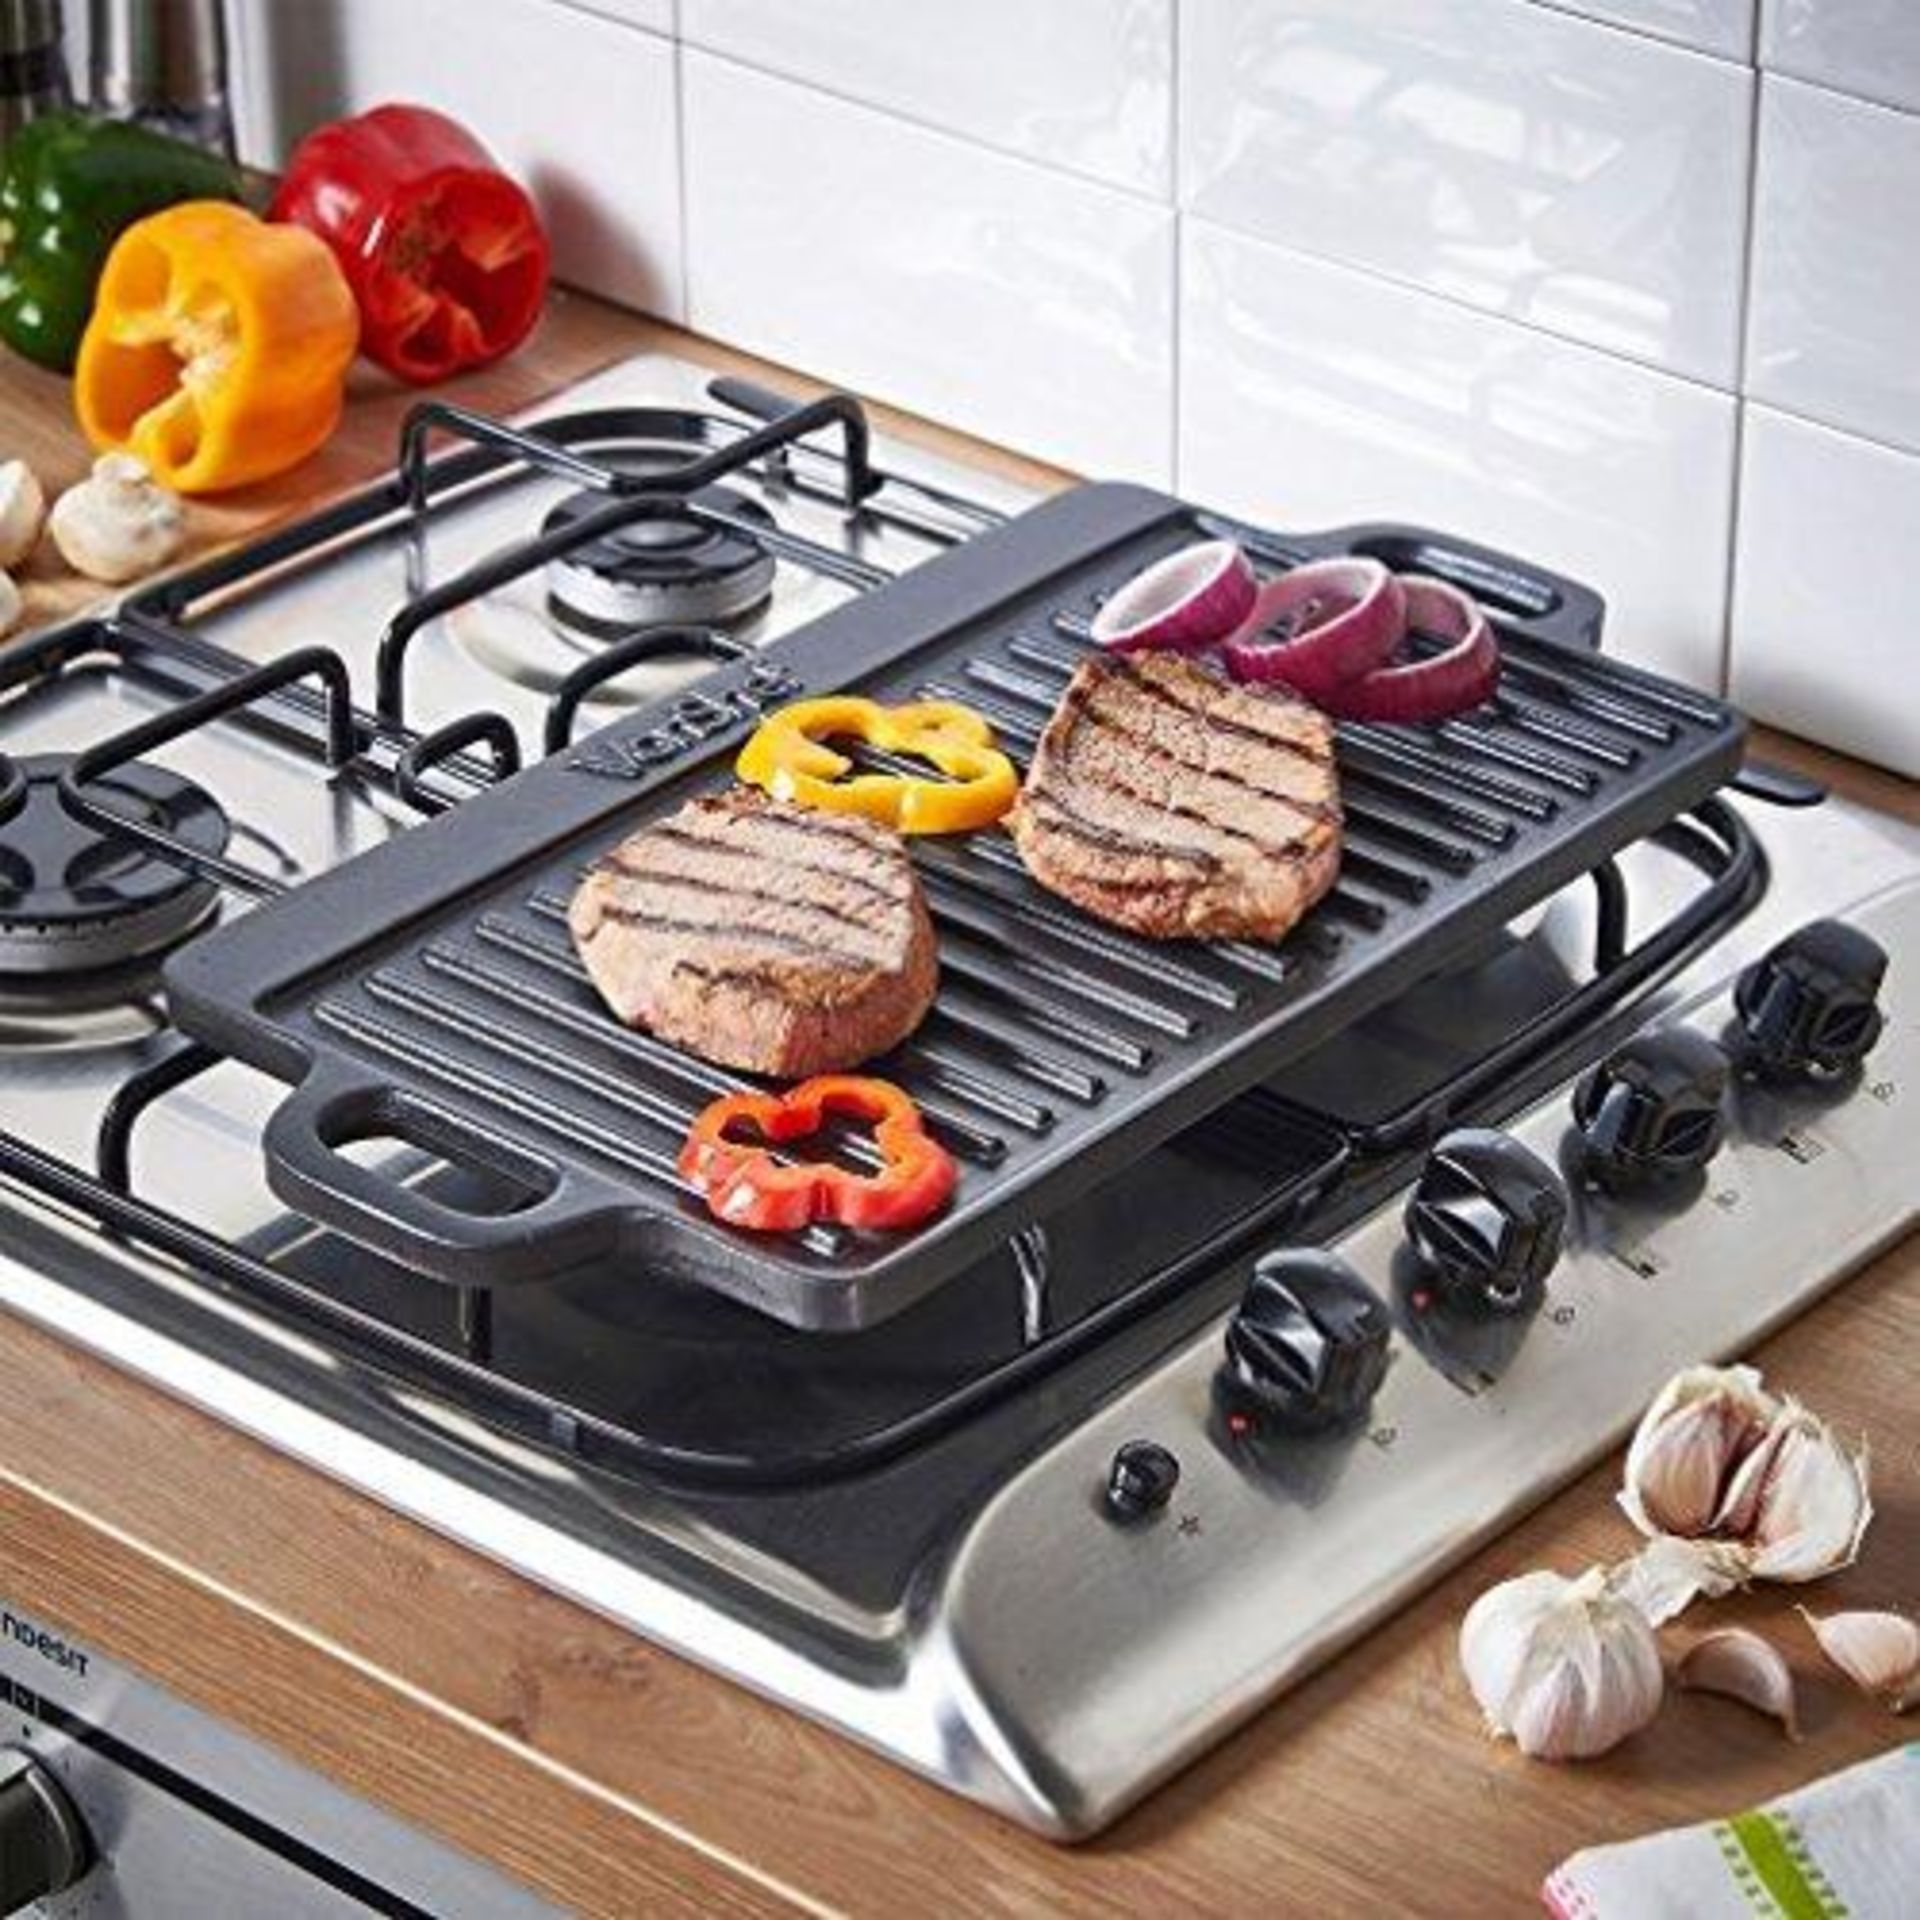 37cm Cast Iron Griddle 37cm Cast Iron Griddle Versatile, multi-functional and a fun way to cook, the